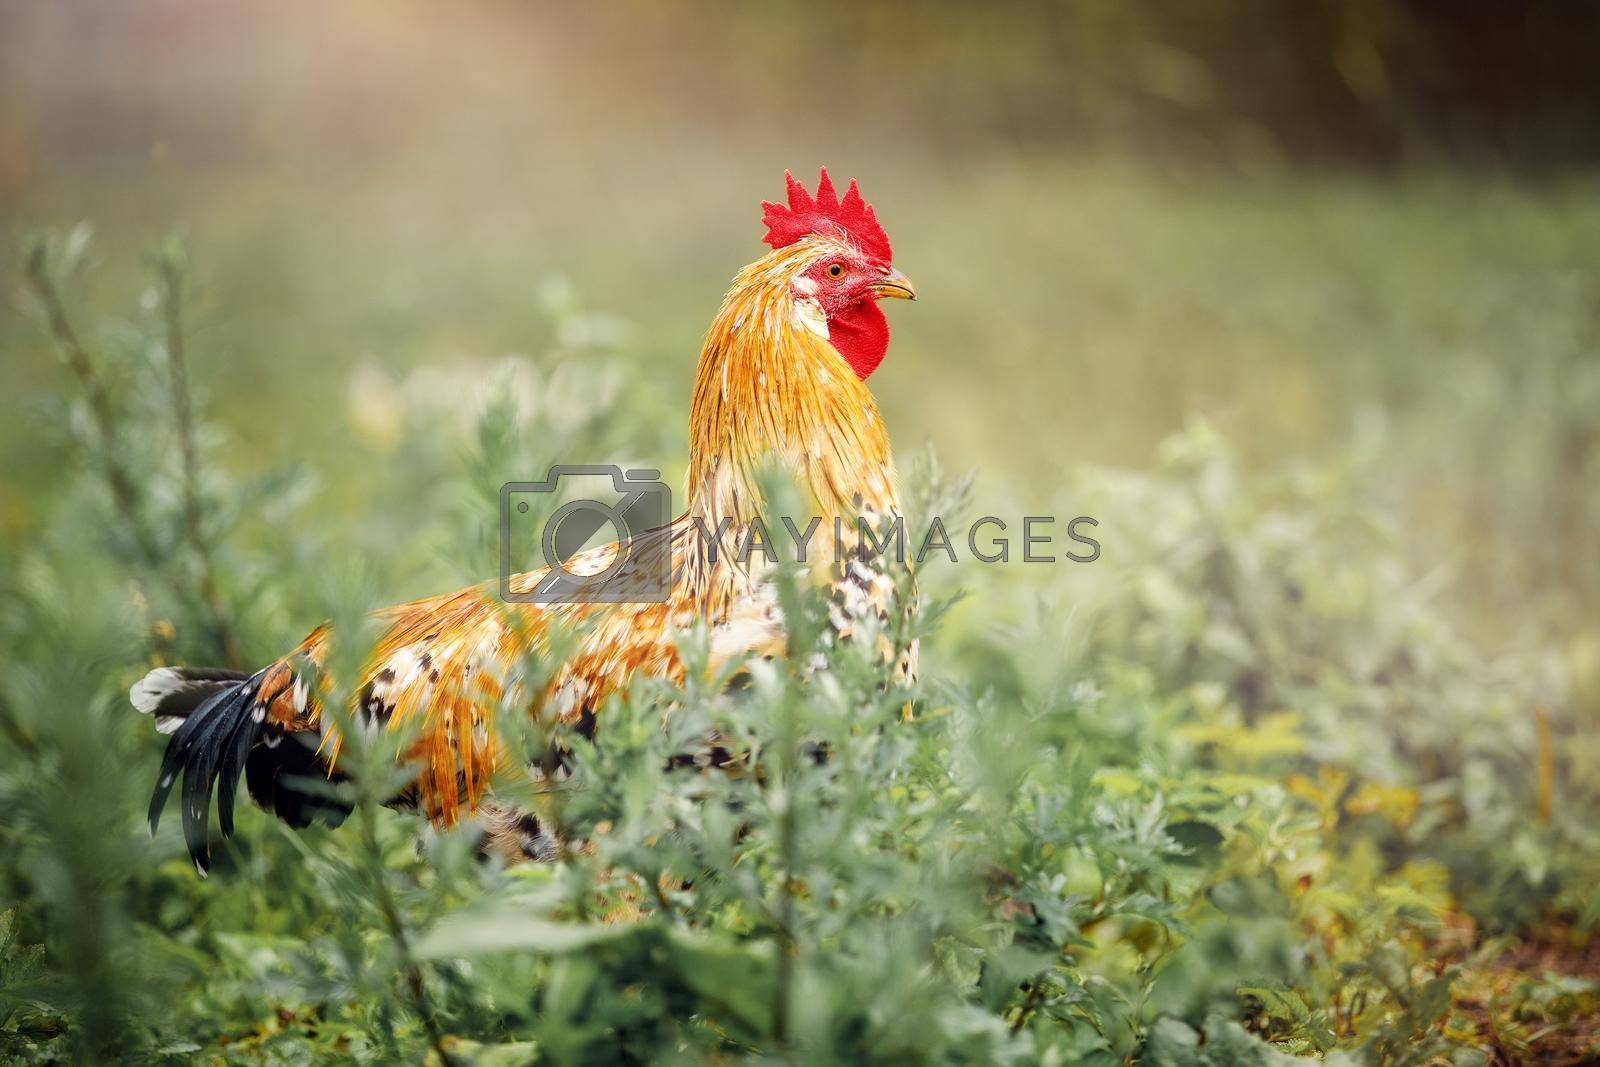 Royalty free image of Beautiful Rooster standing on the grass in blurred nature green background by Lincikas